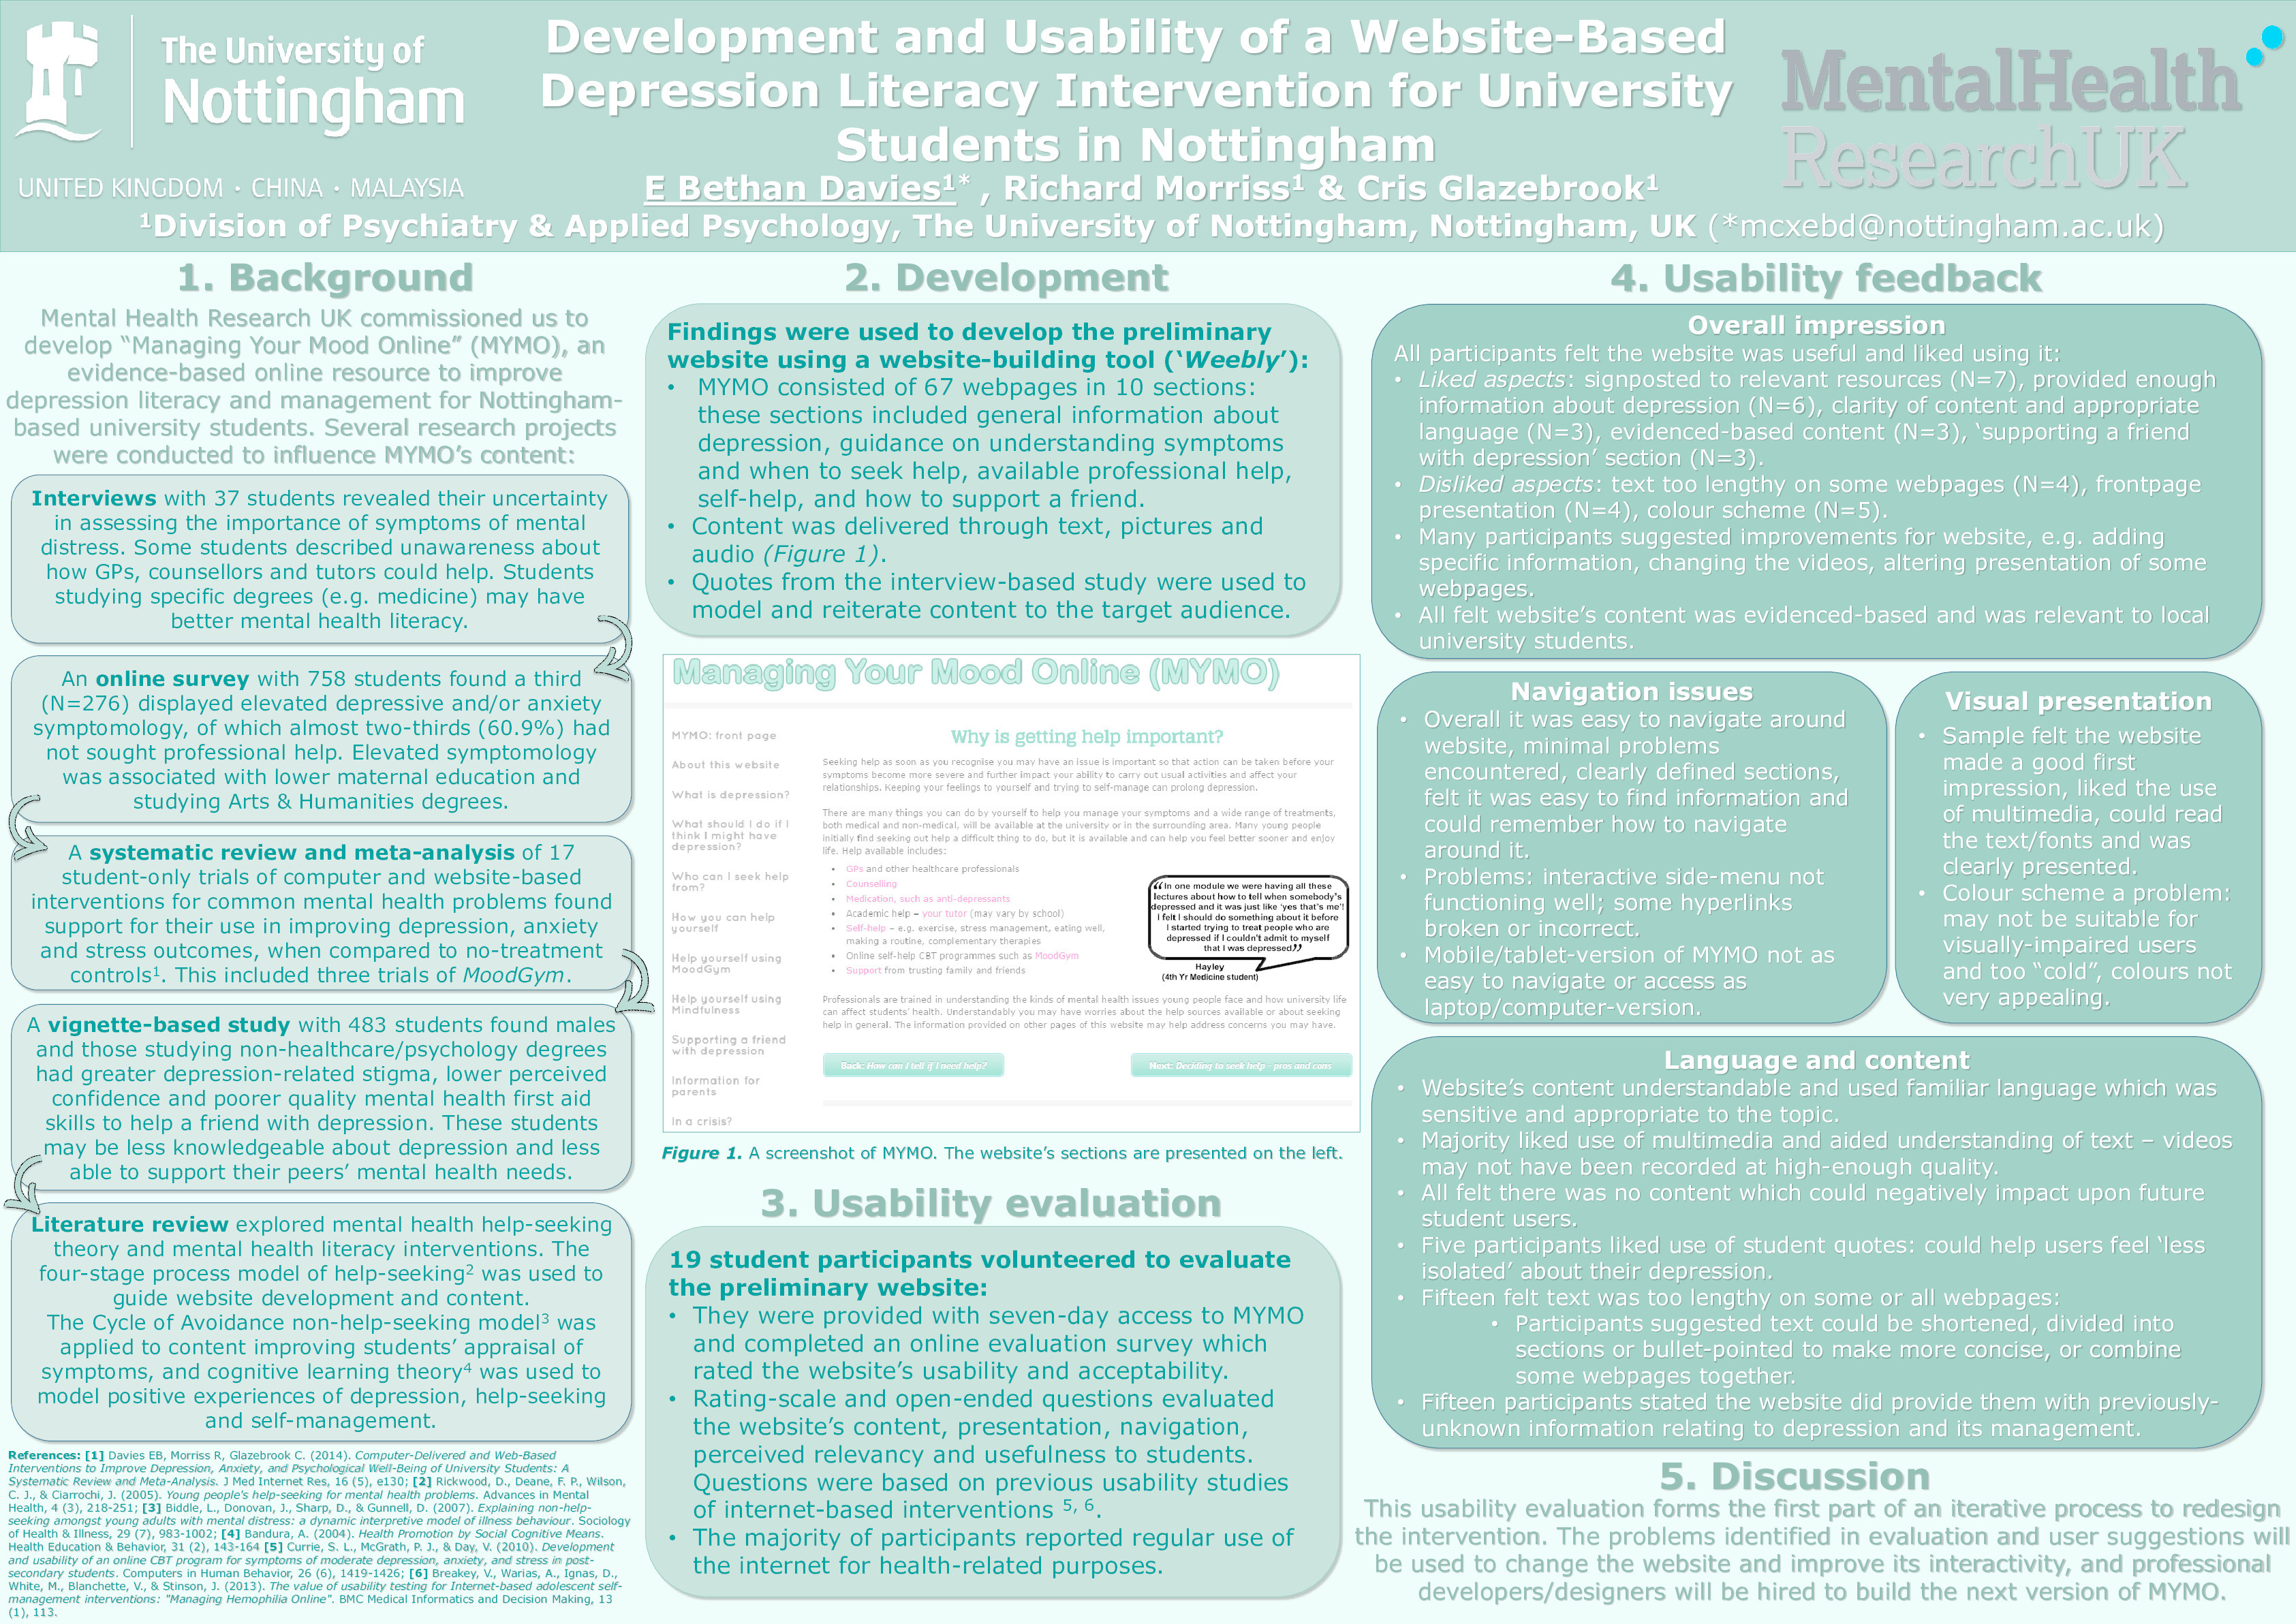 Development and usability of a website-based depression literacy intervention for university students in Nottingham Thumbnail